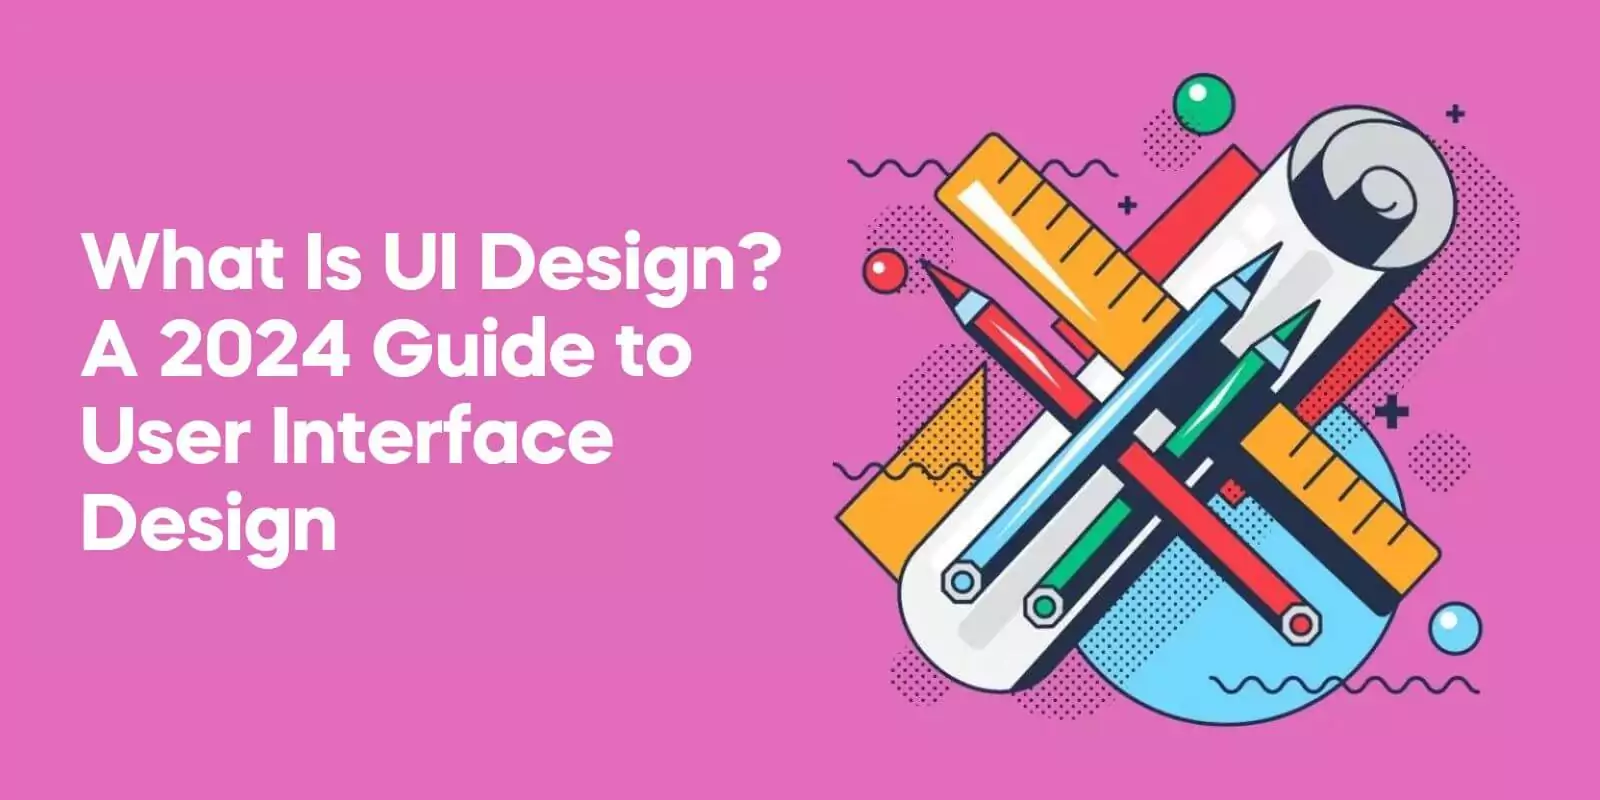 What is UI Design A 2024 Guide to User Interface Design